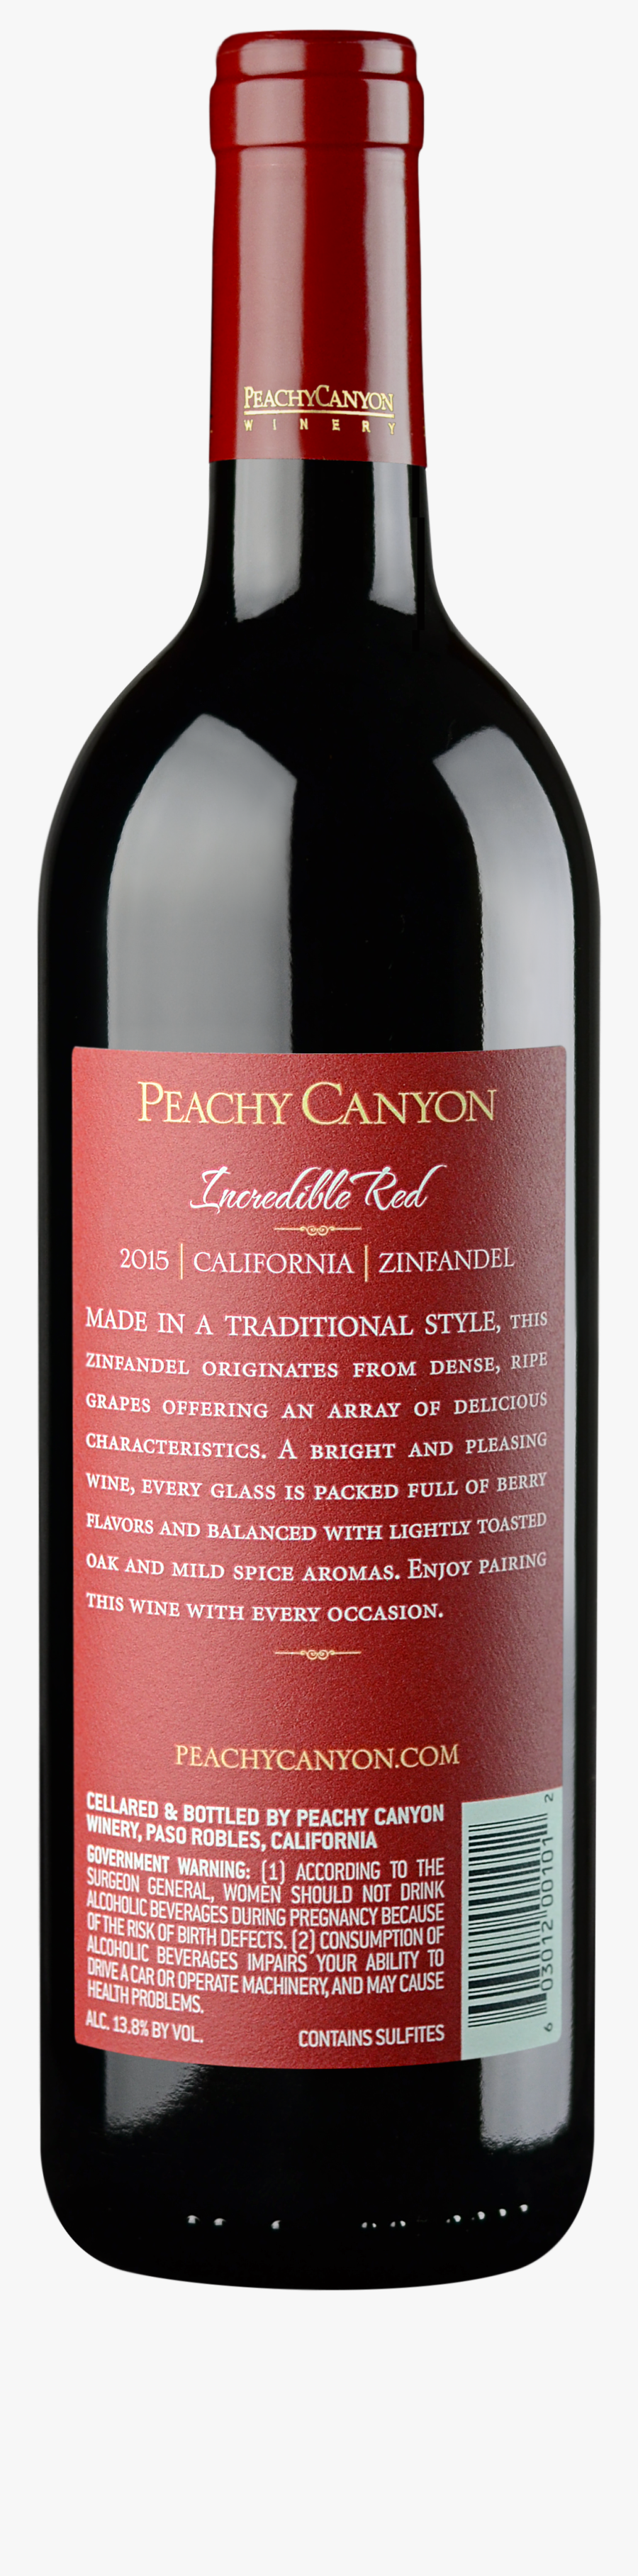 Peachy Canyon Incredible Red Zinfandel 2015, Transparent Clipart